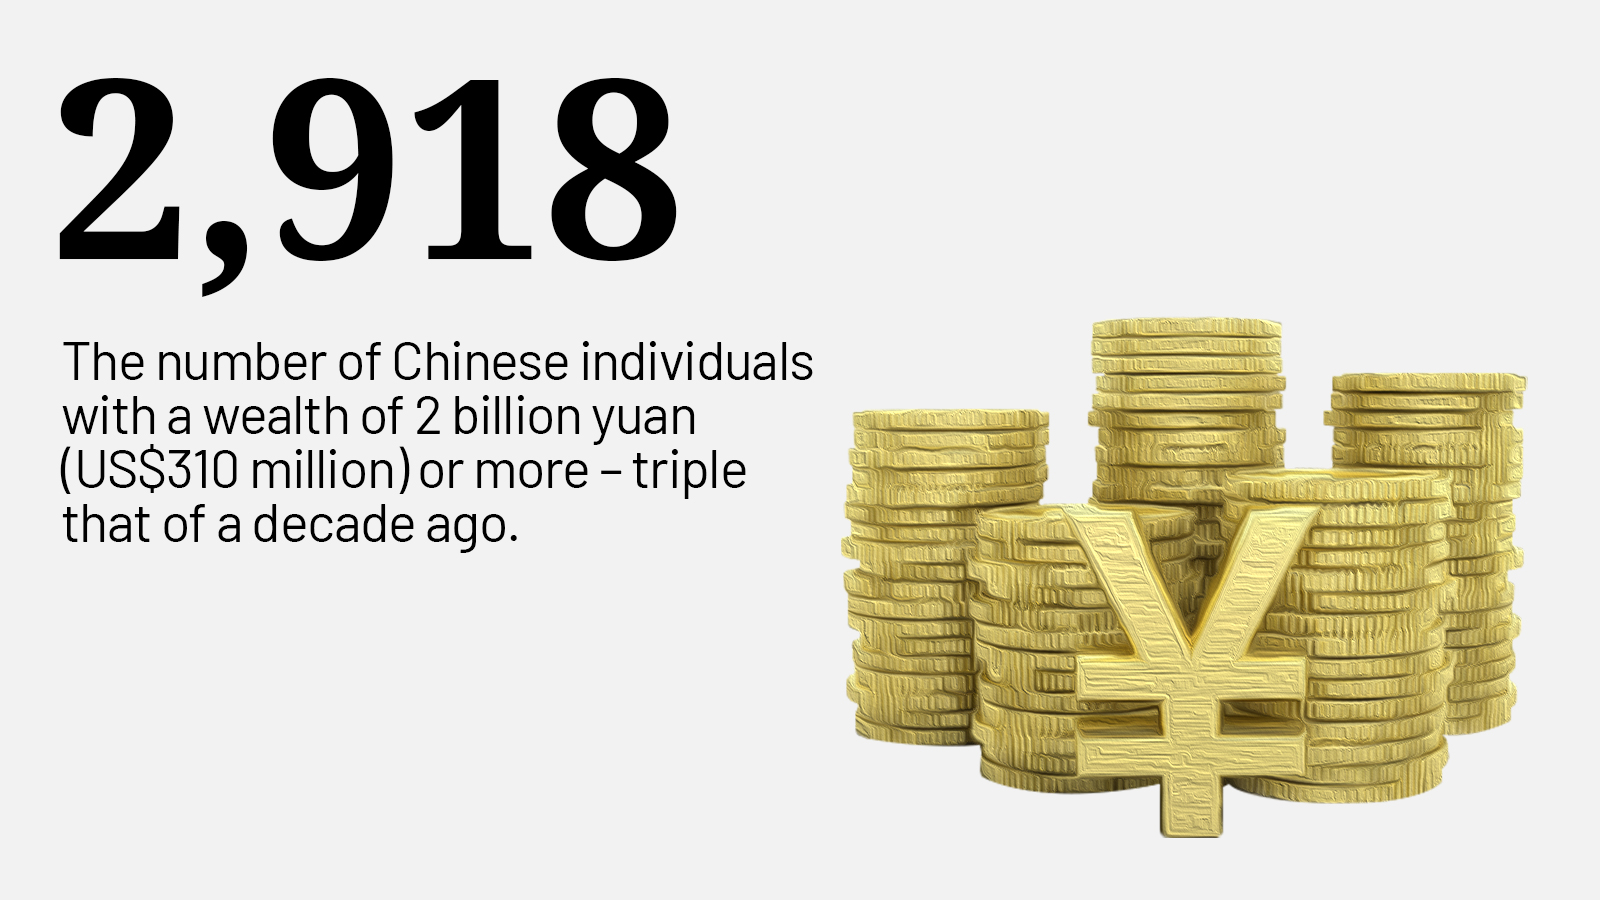 Chinese individuals with wealth of 2 billion yuan or more